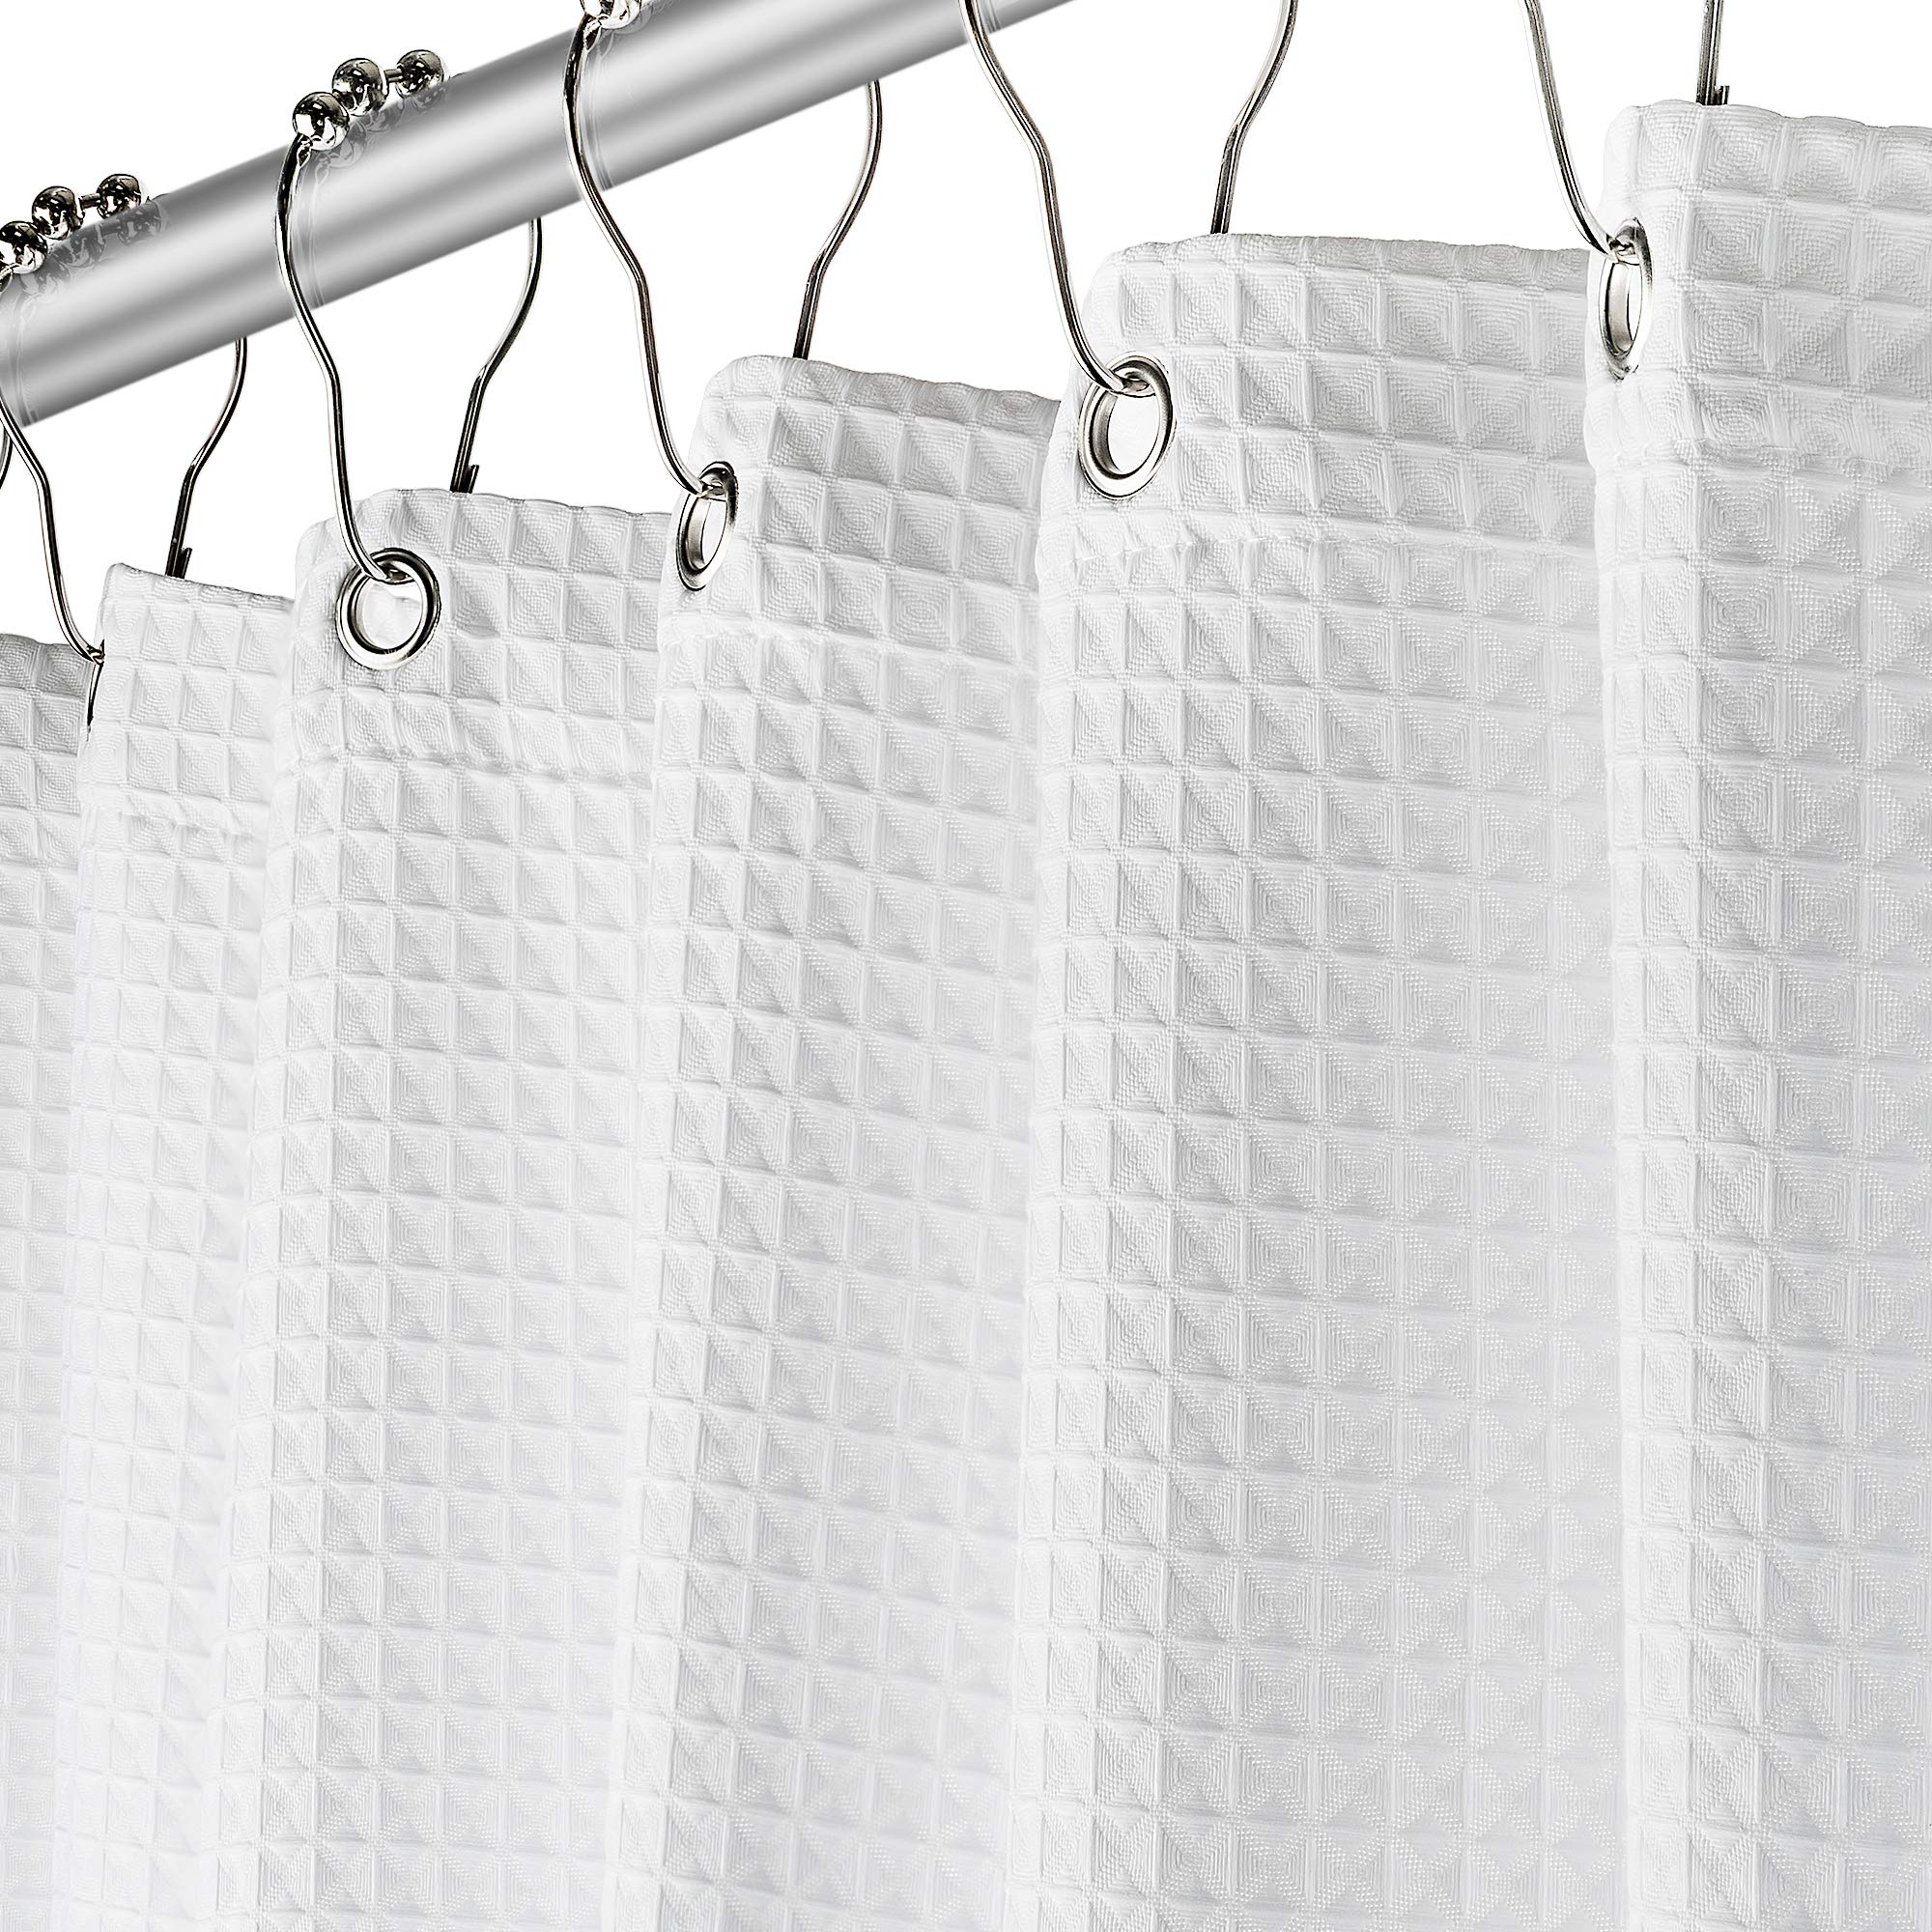 Creative Scents Fabric White Shower Curtain for Bathroom - Spa, Hotel Luxury Matt Waffle Weave Square Design, Water Repellent, 230 GSM Weighty Cloth, 72" x 72" for Decorative Bathroom Curtains  - Like New